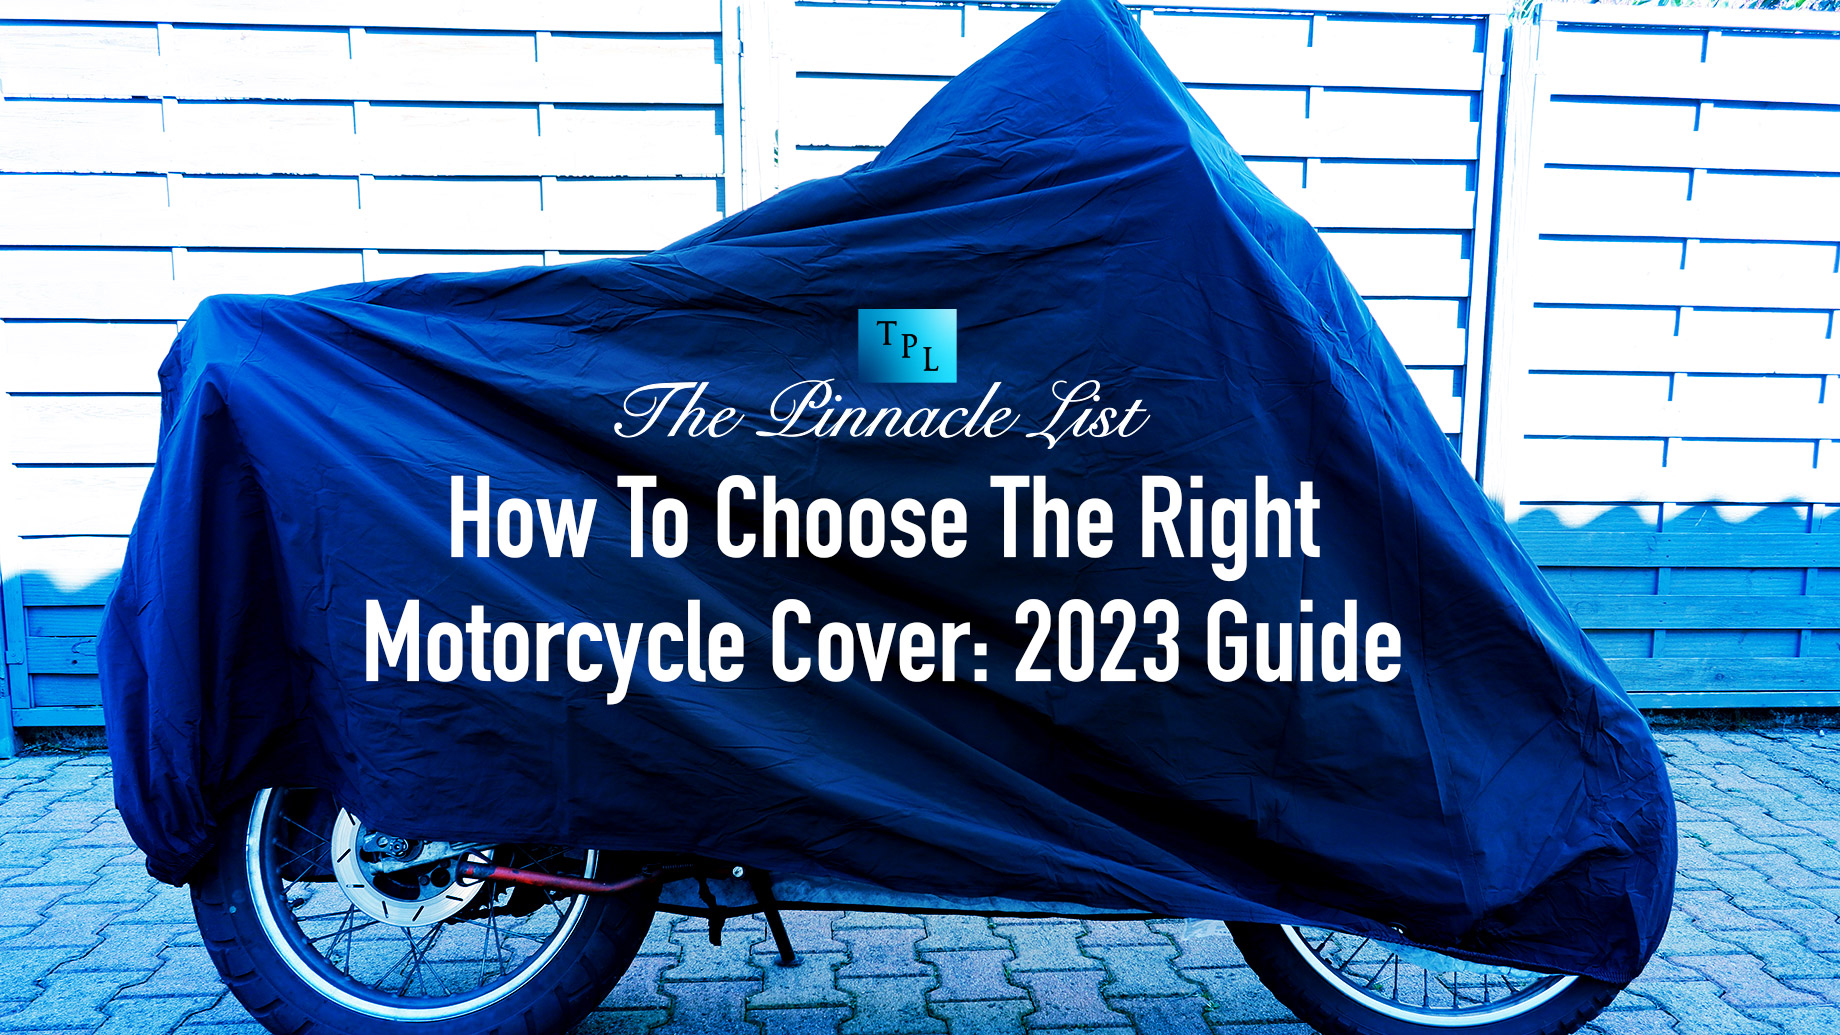 How To Choose The Right Motorcycle Cover: 2023 Guide